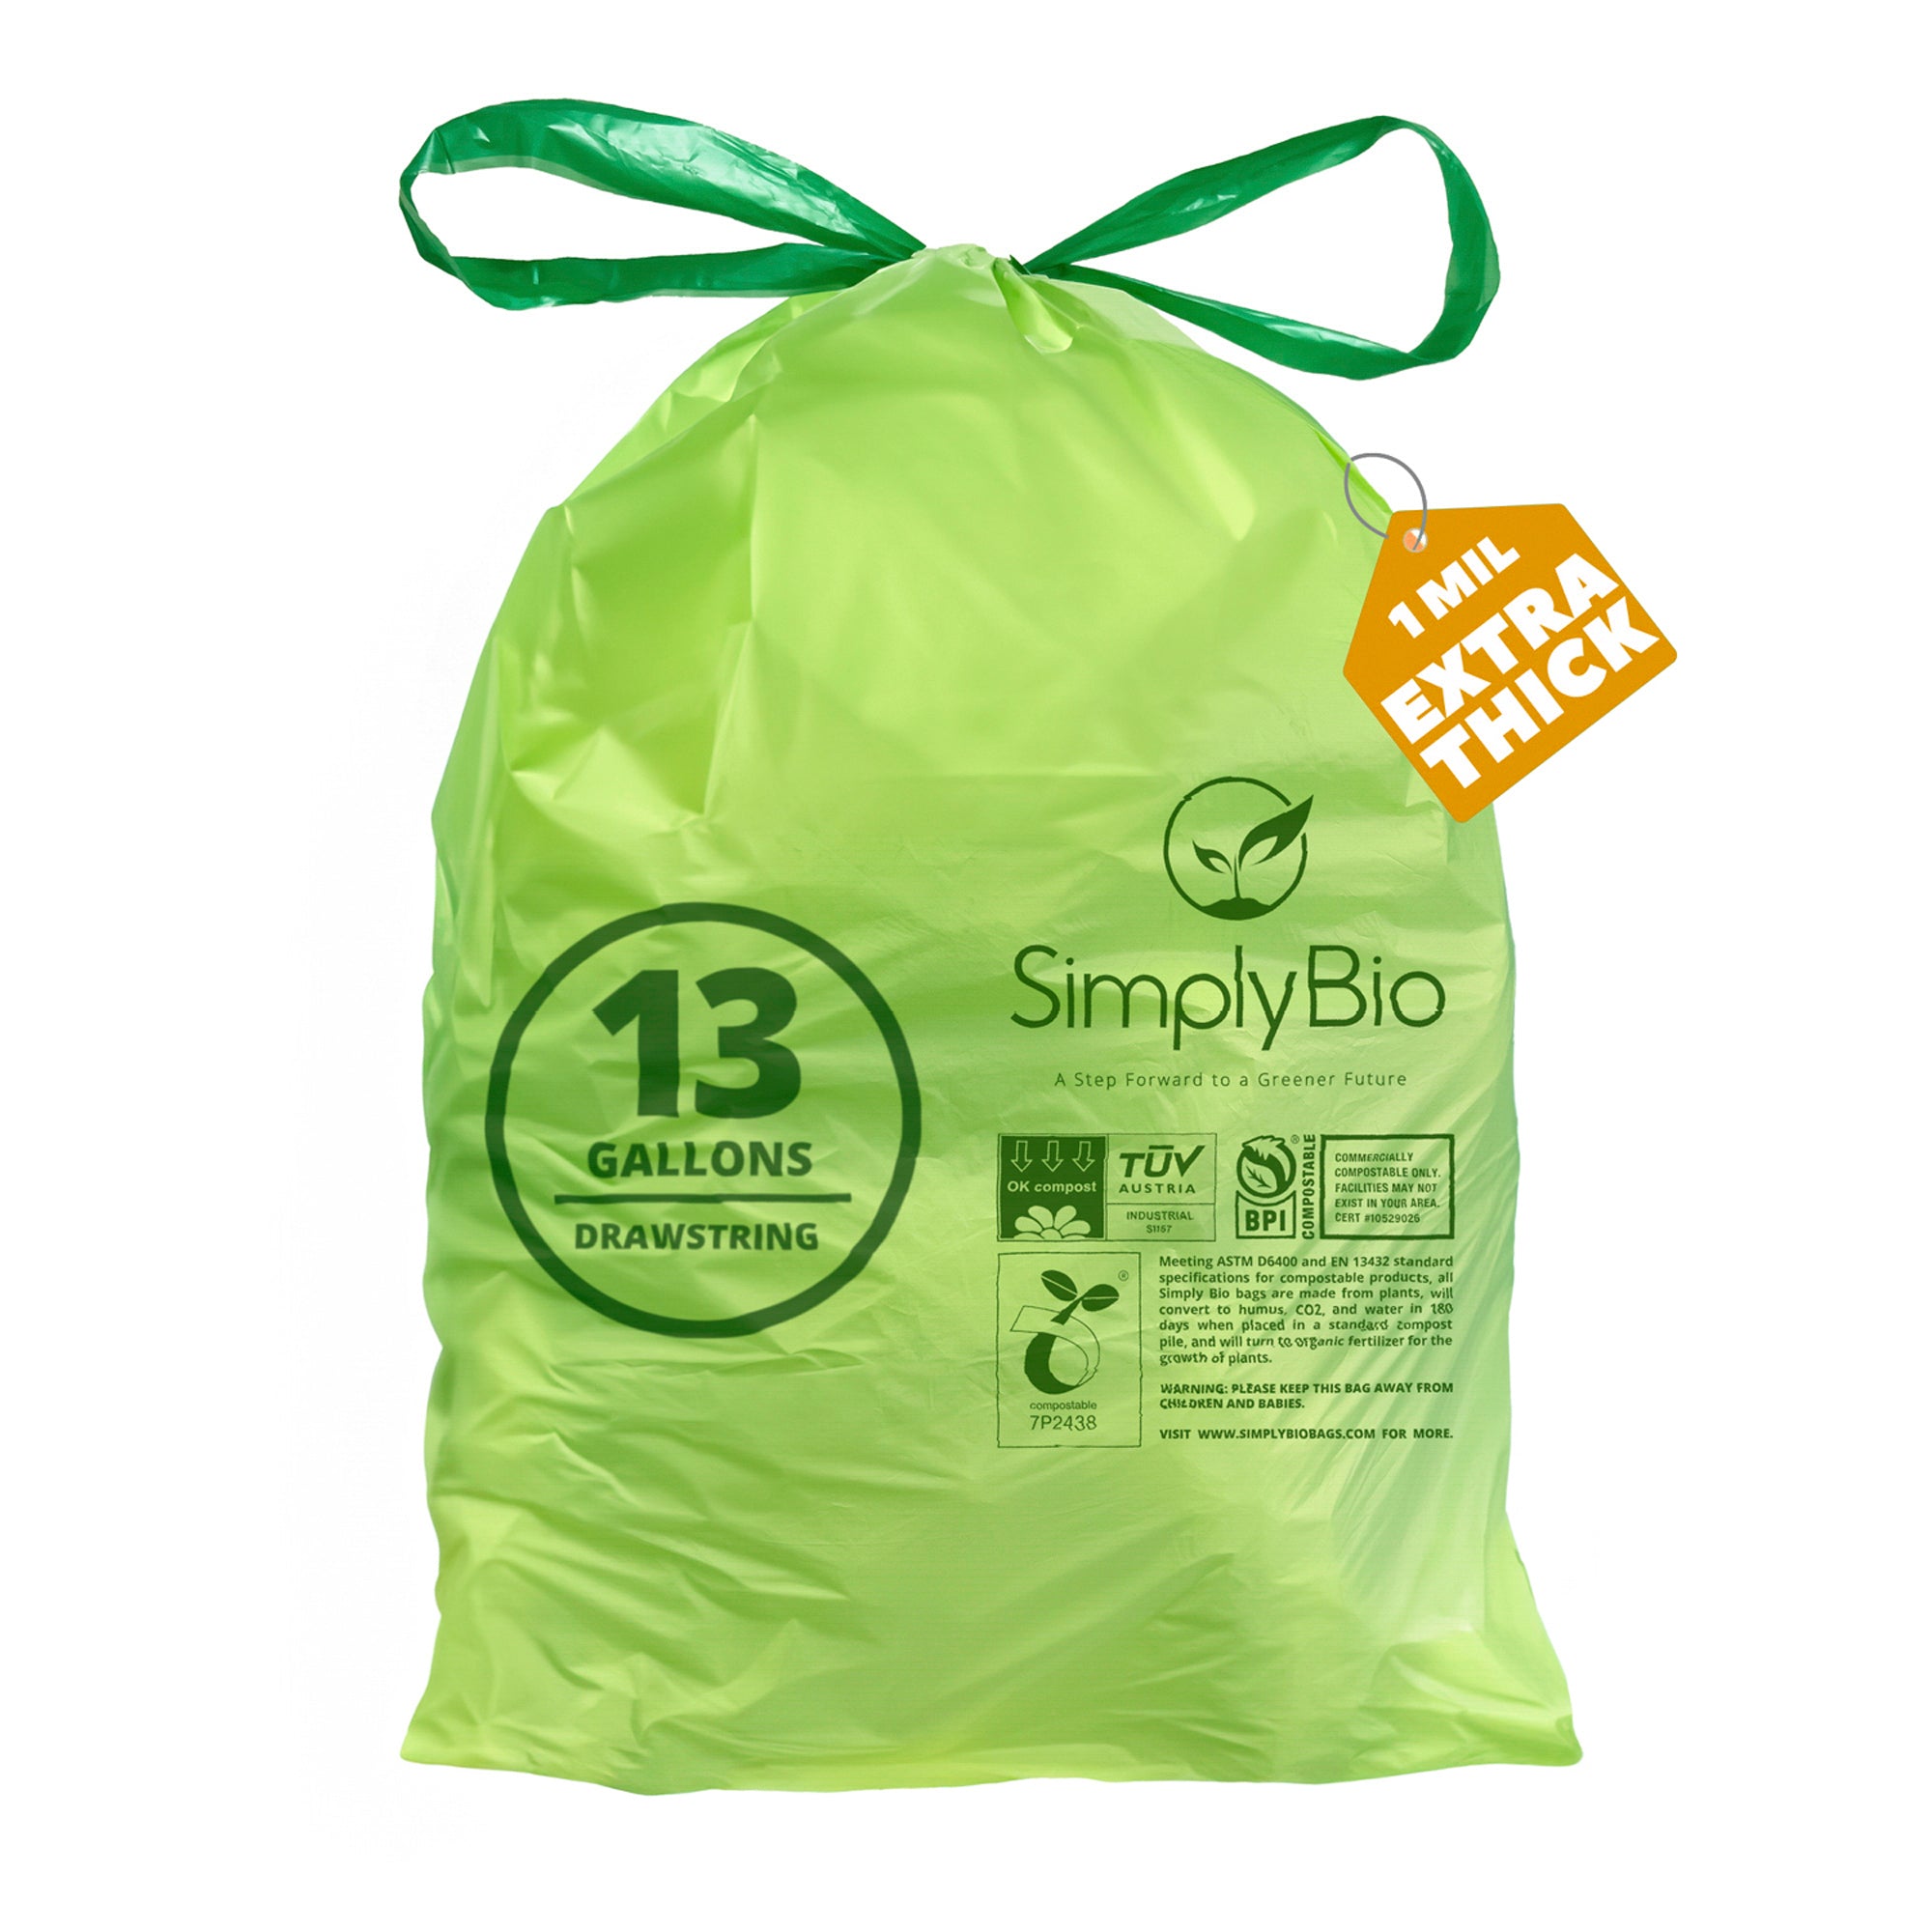 Everything you need to know about compostable and biodegradable bin bags